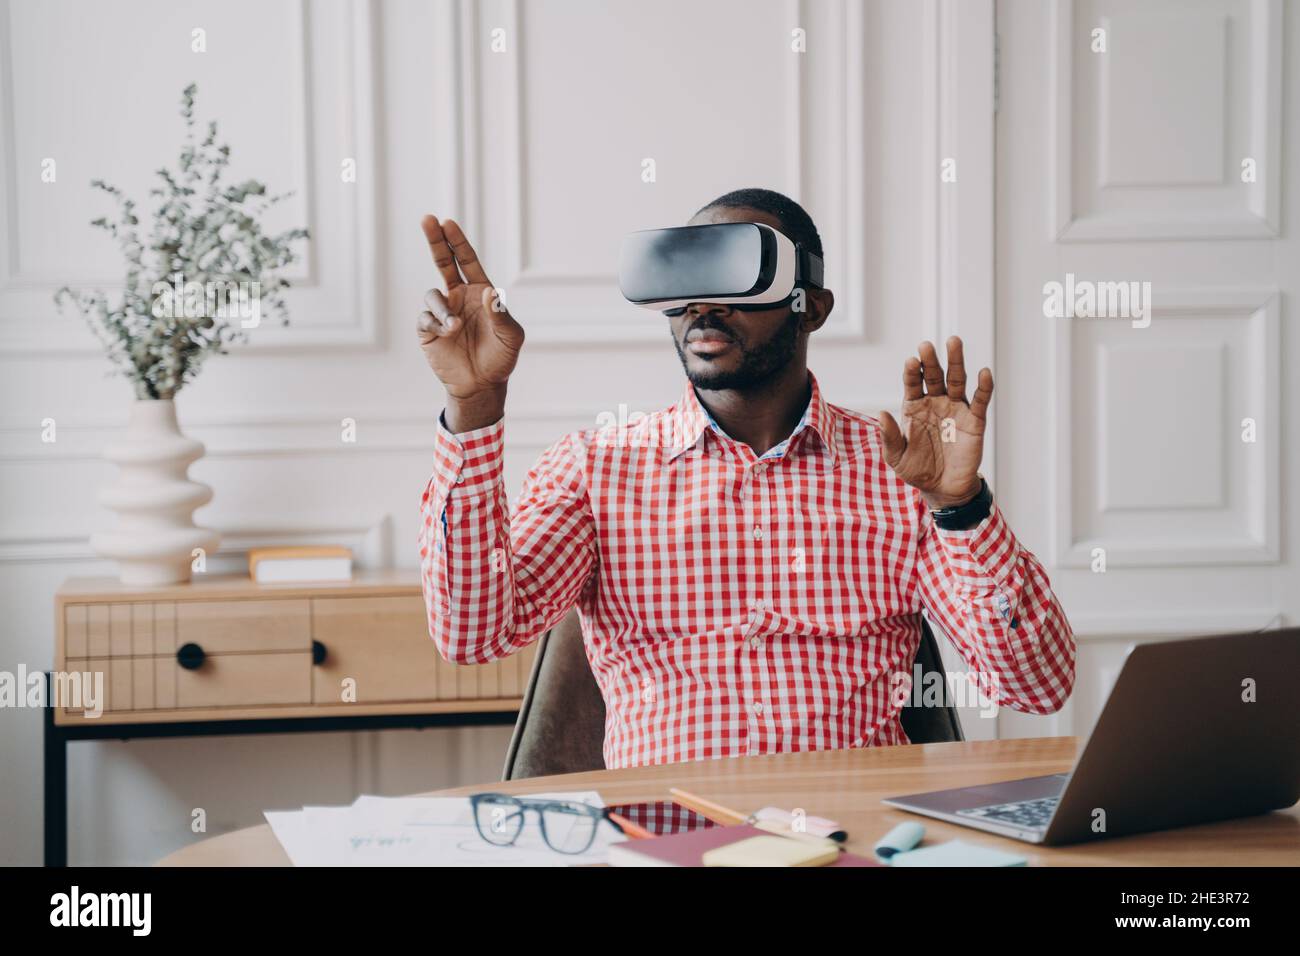 Concentrated Afro american businessman using VR headset, experiencing virtual reality playing game Stock Photo